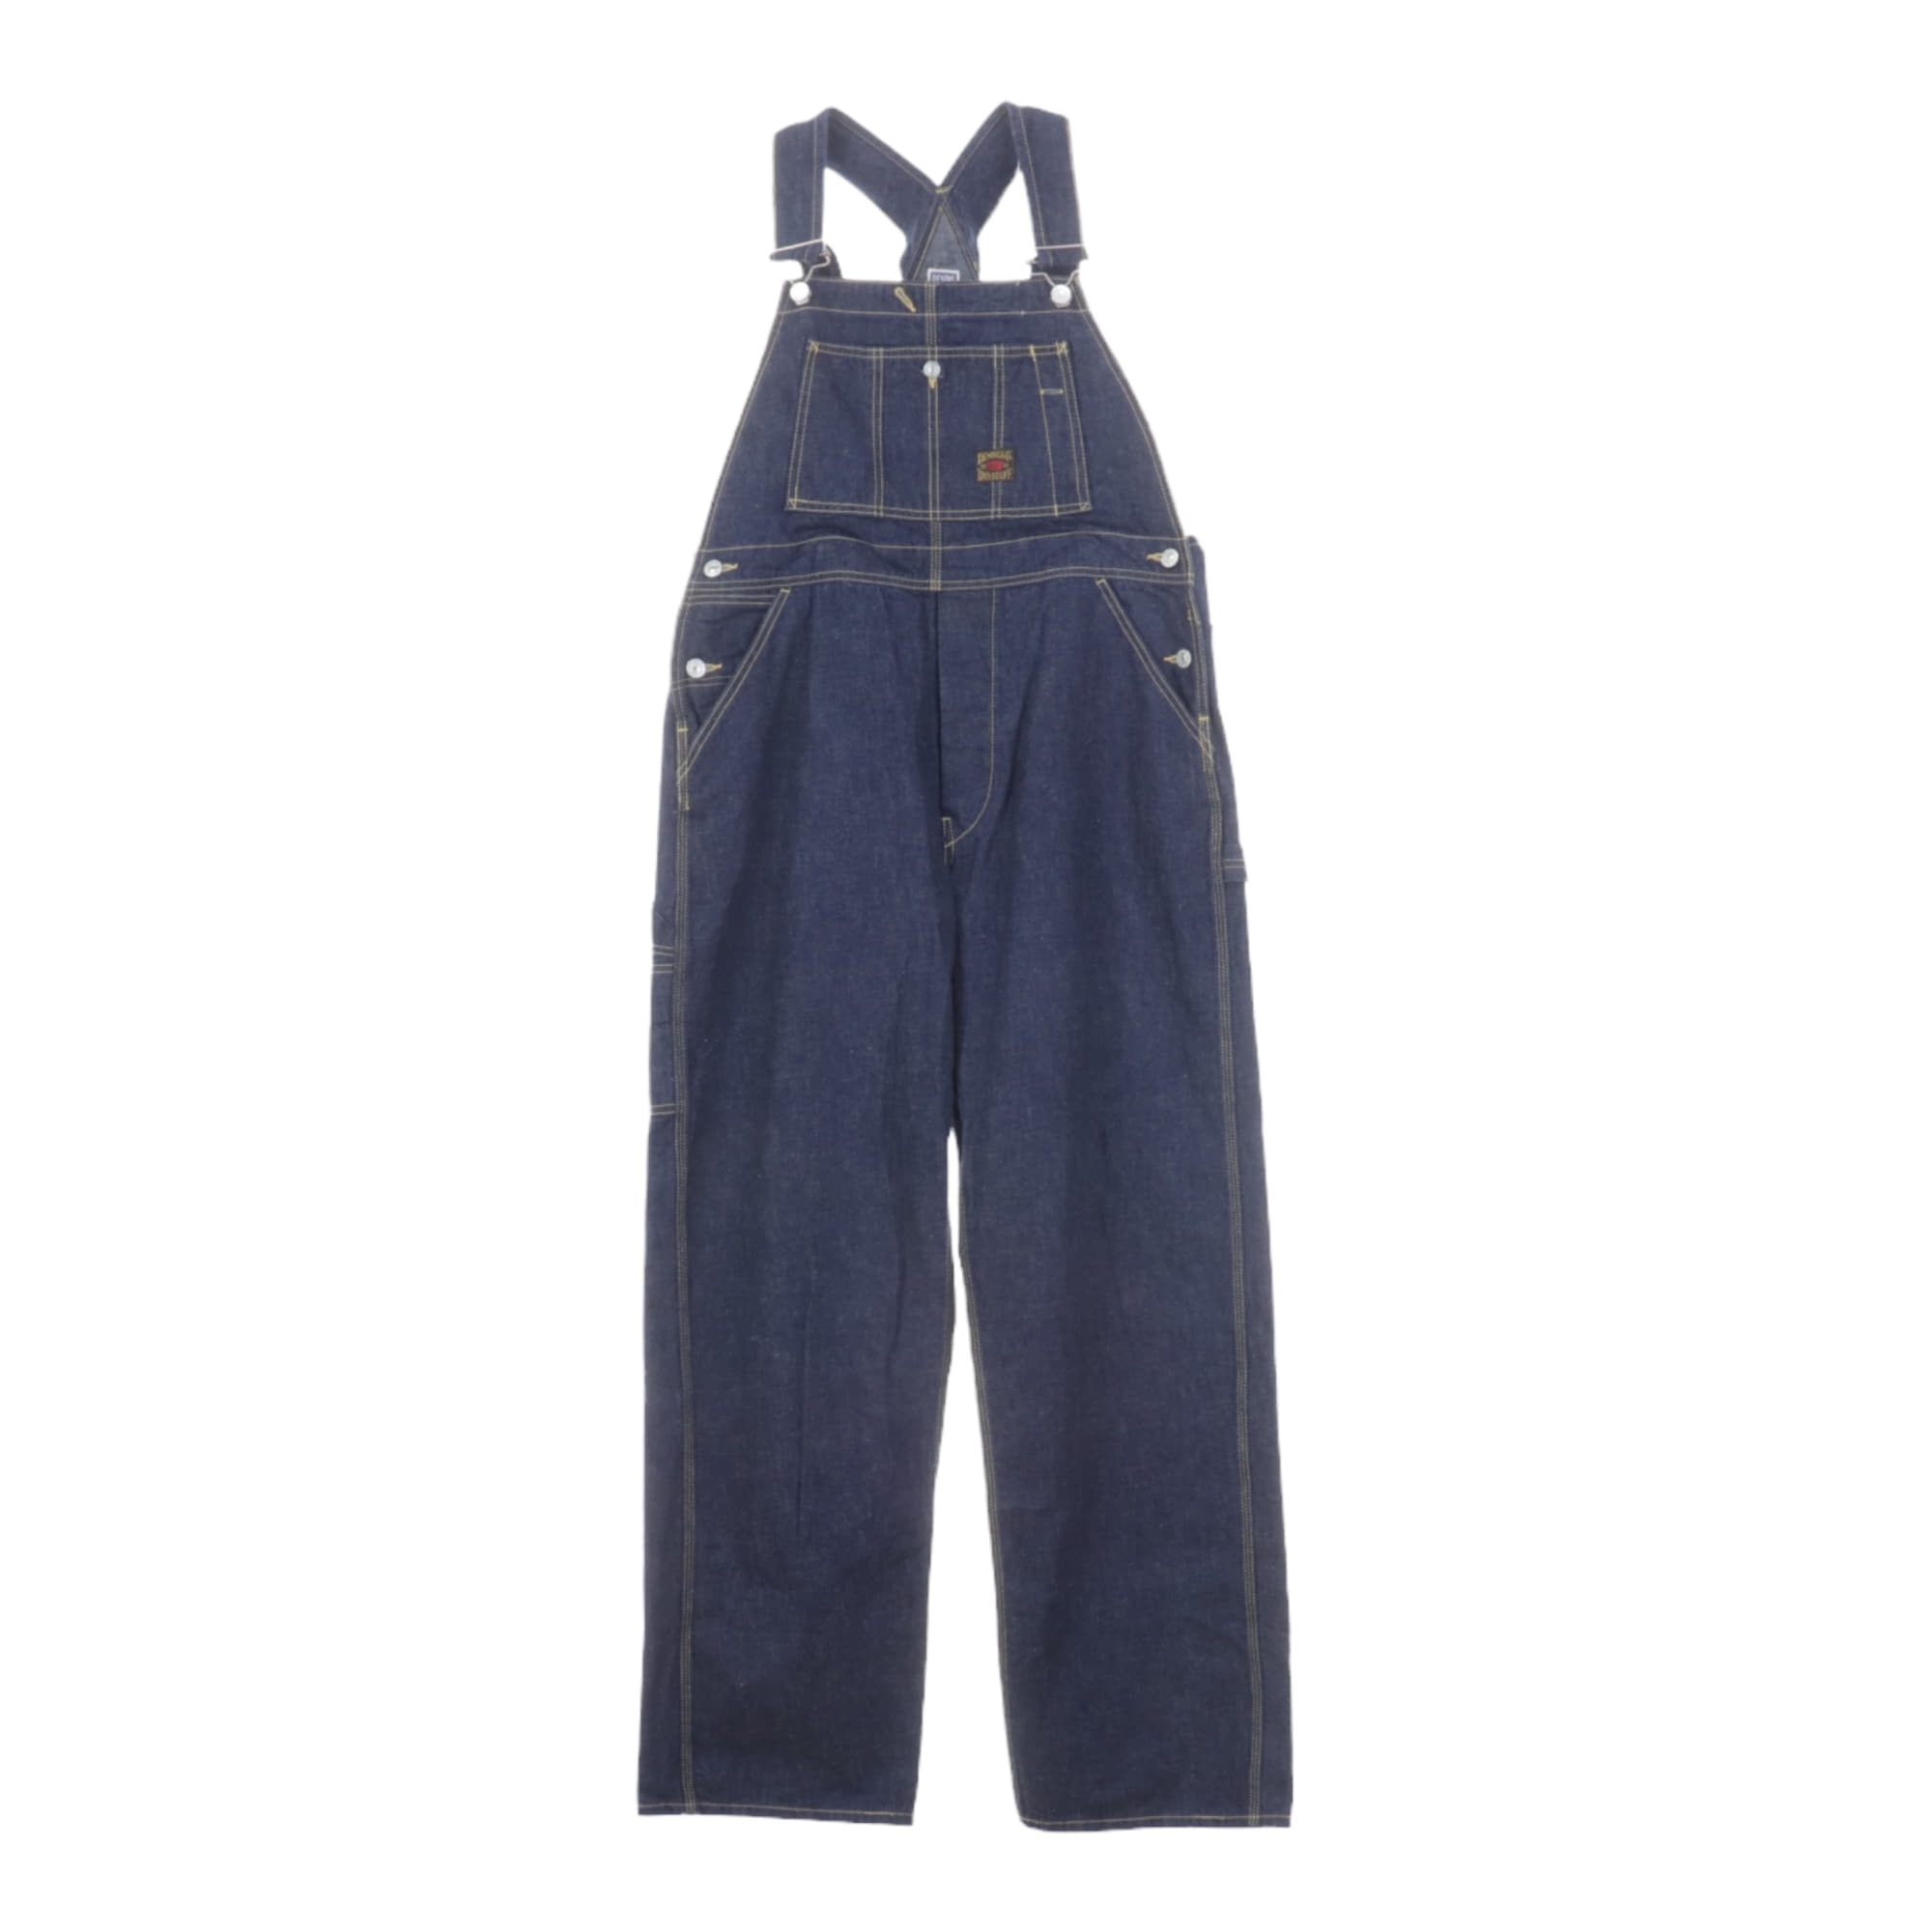 Denime,Overall/Jumpsuit